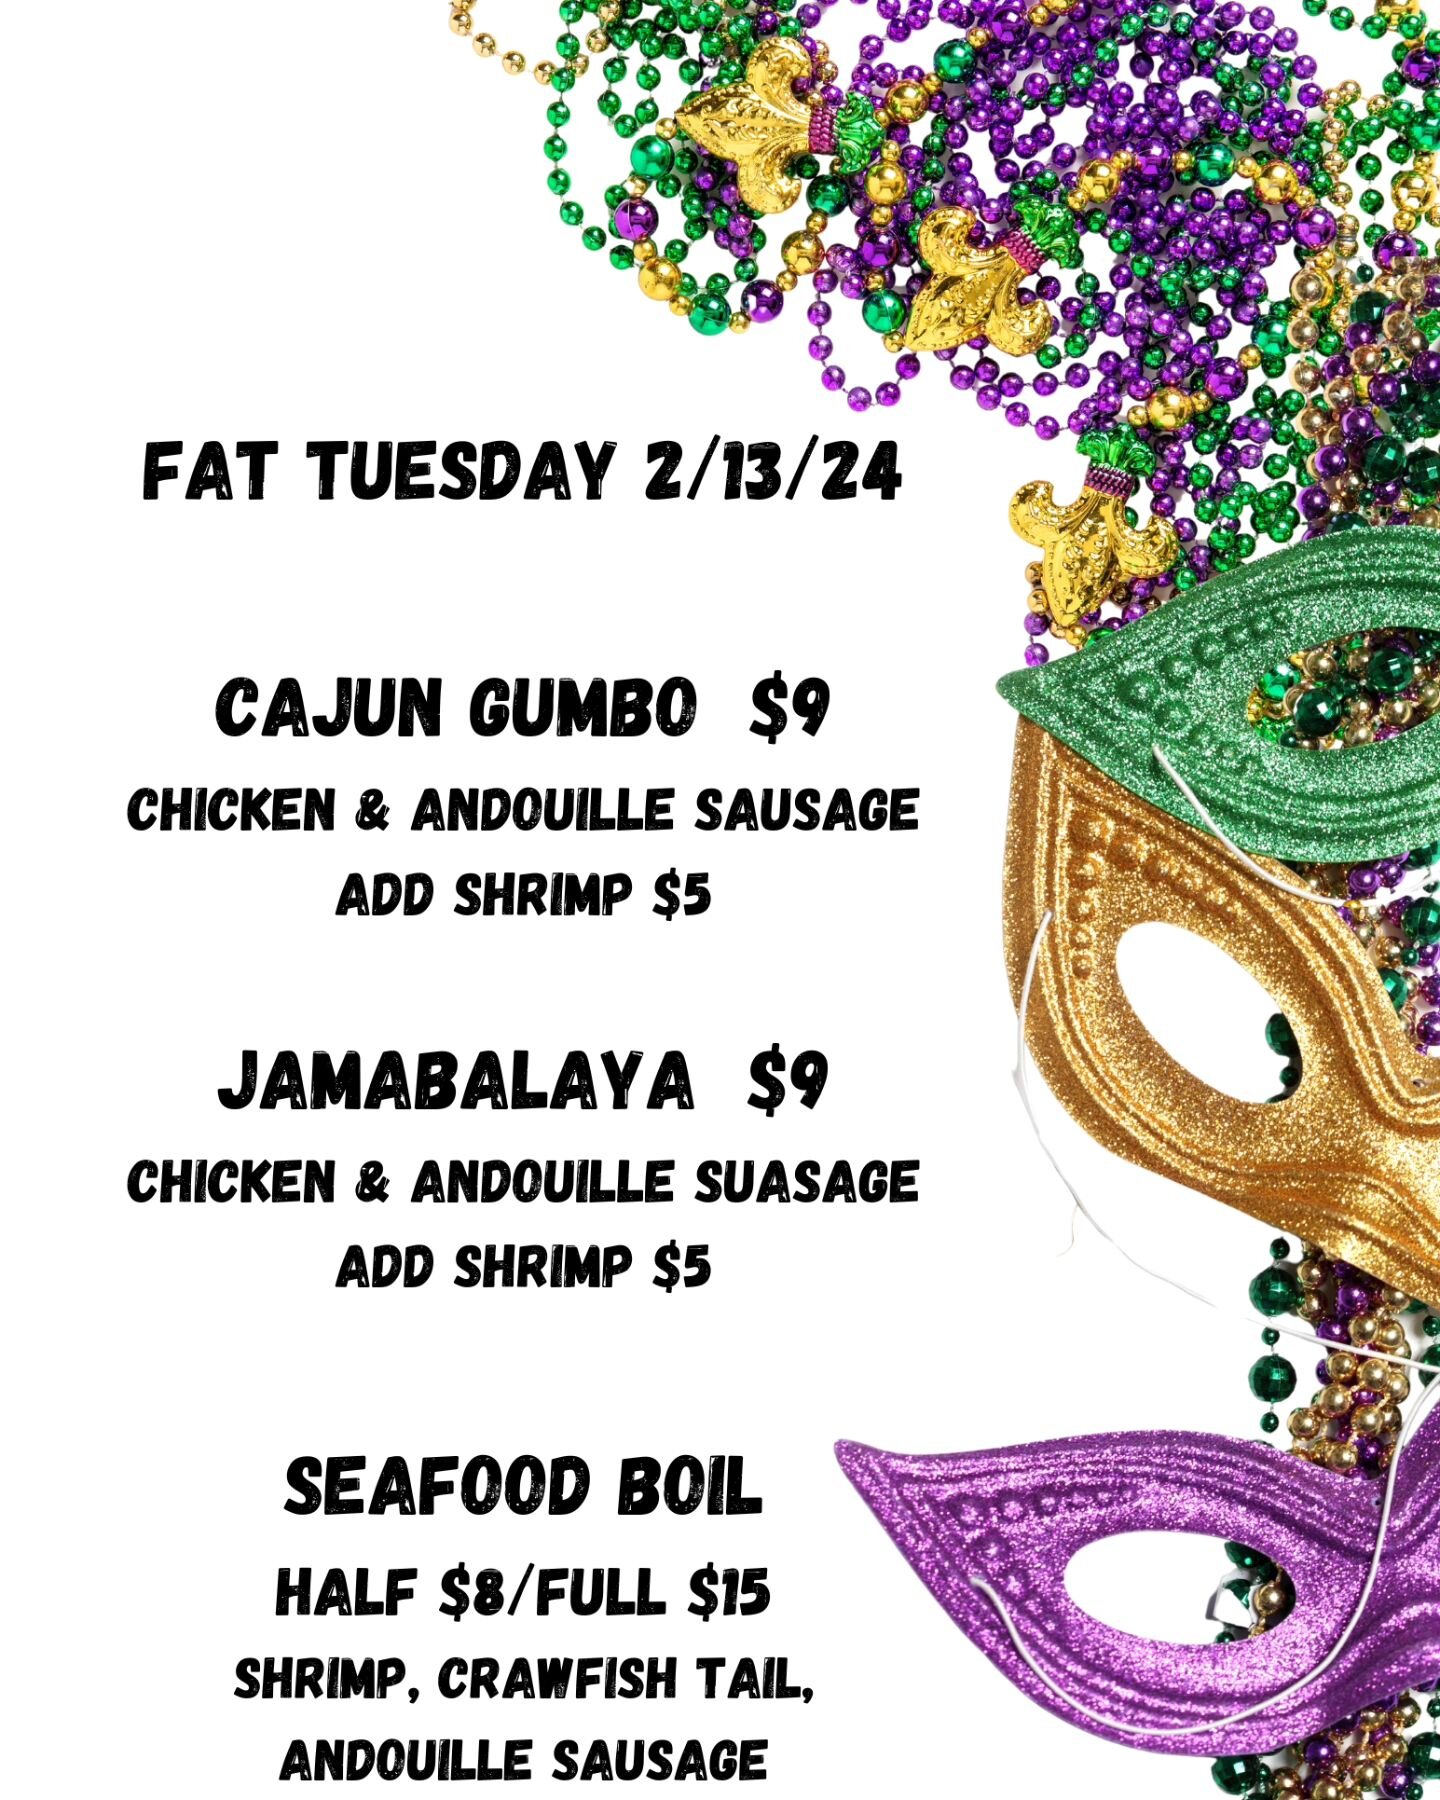 Fat Tuesday food menu goes from 5pm until supplies run out. Gumbo &amp; jambalaya are shellfish free unless shrimp is ordered separately.